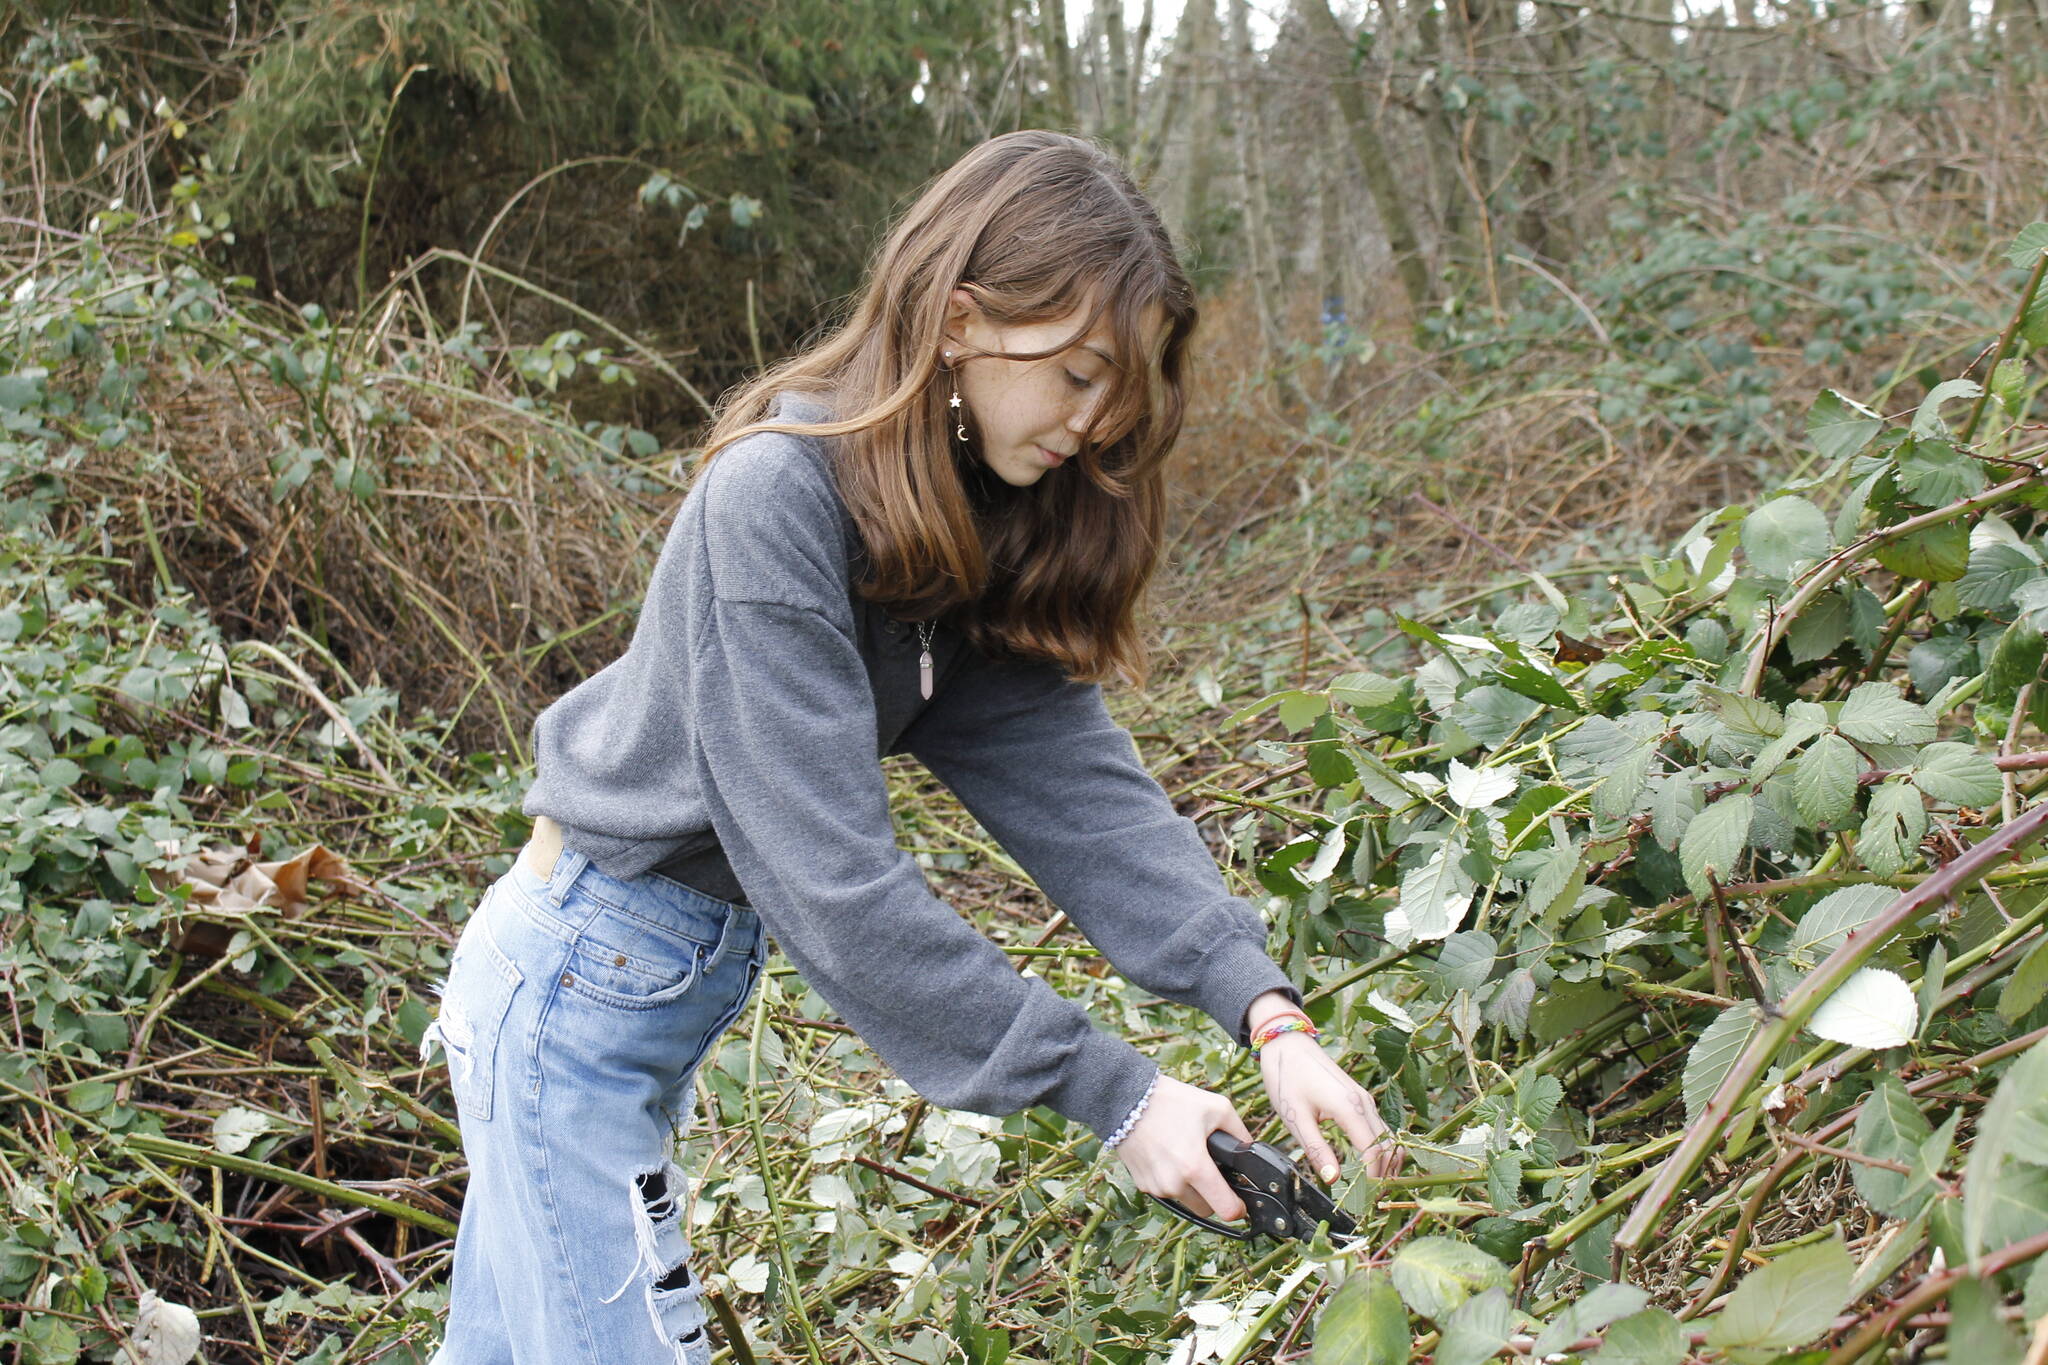 Photo by Kira Erickson/South Whidbey Record
Seventh grader Anja Bentsen clips some blackberry bushes bordering a wetland area near the South Whidbey Community Center. Her class is involved in several community-focused projects, including the elimination of invasive plant species.